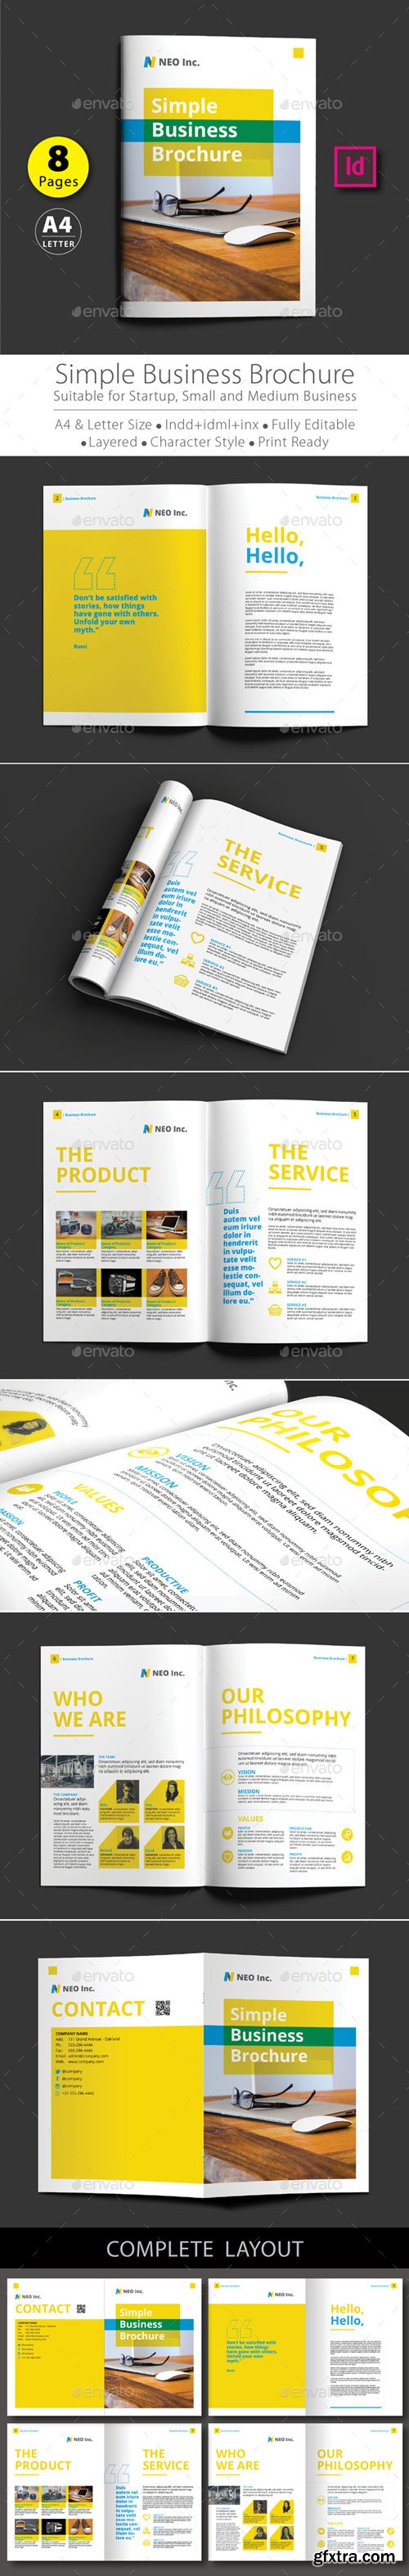 GraphicRiver - Simple Business Brochure Template V.1 - 16440430